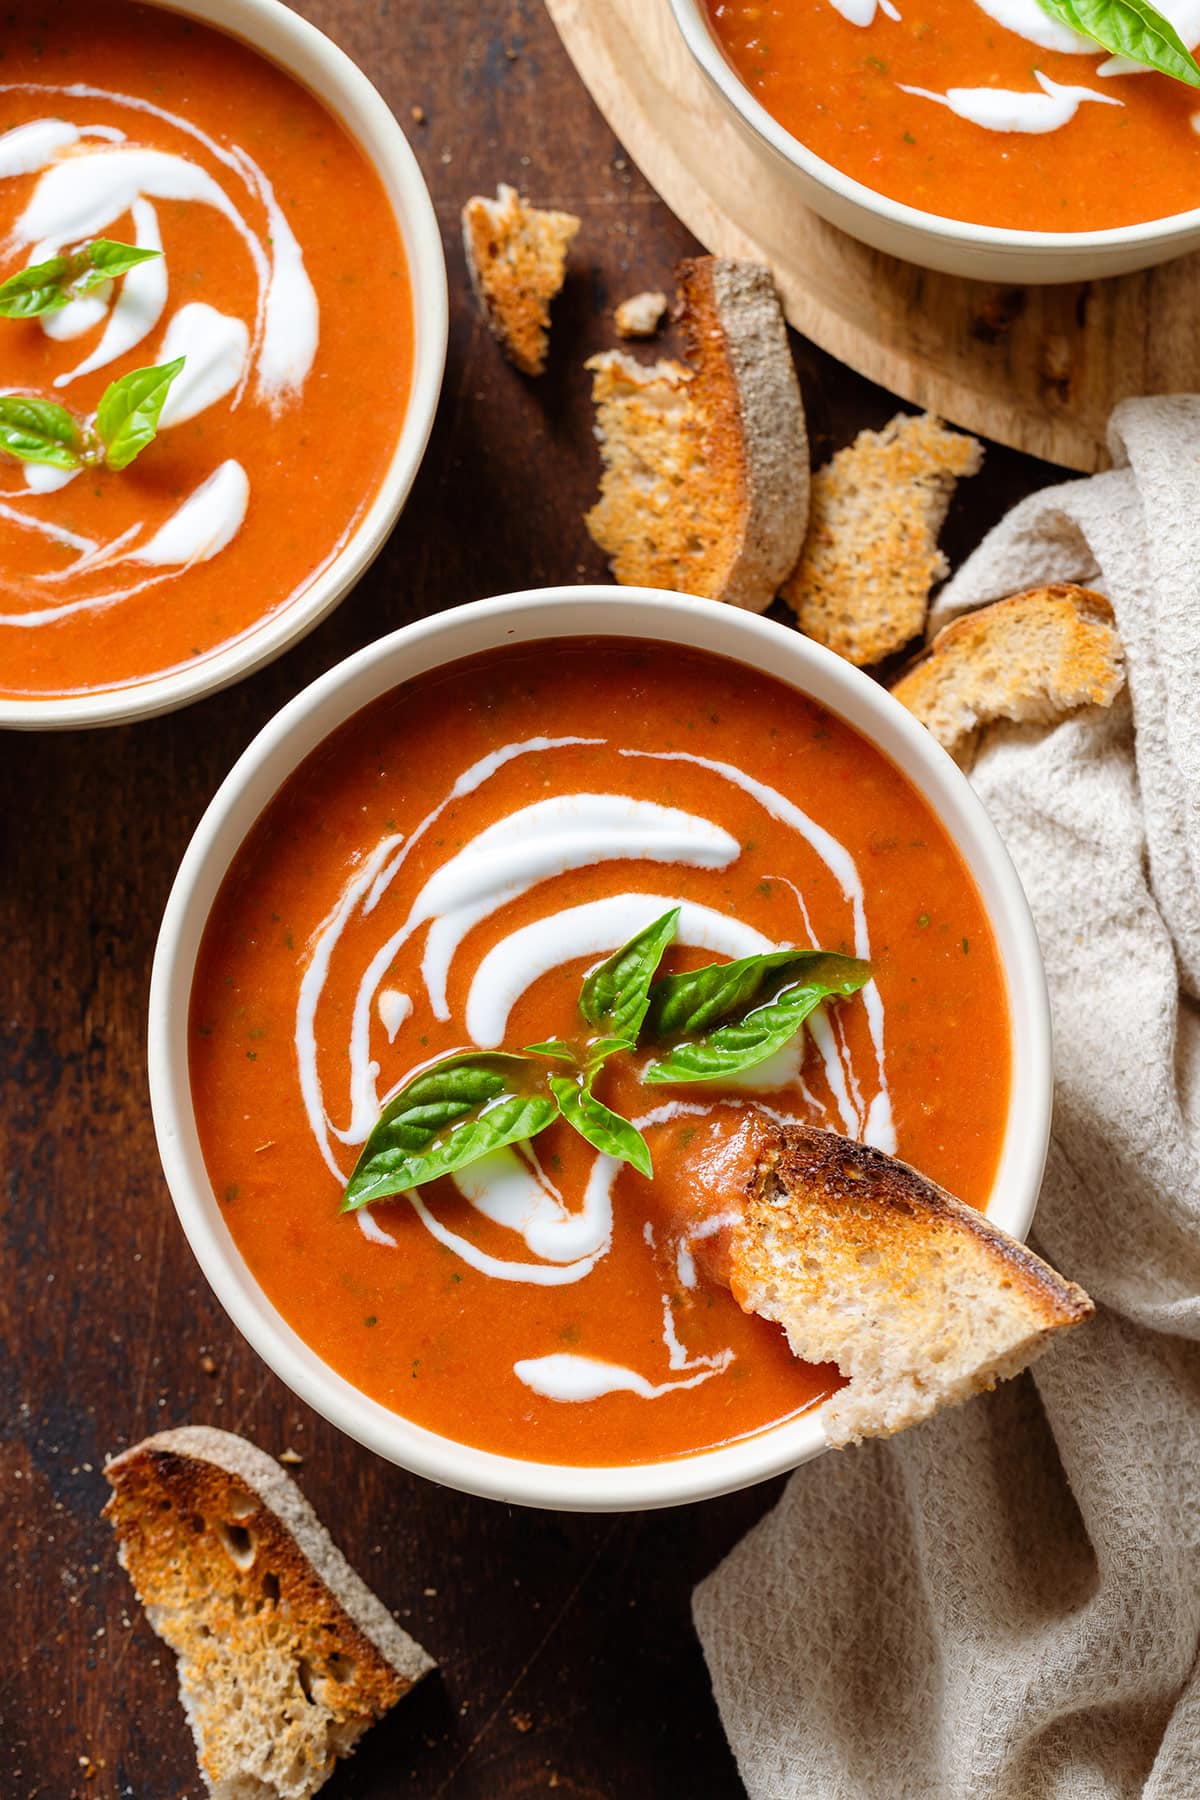 Tomato soup with a drizzle of yogurt in a white bowl garnished with fresh basil and a piece of toasted bread dipped into it.